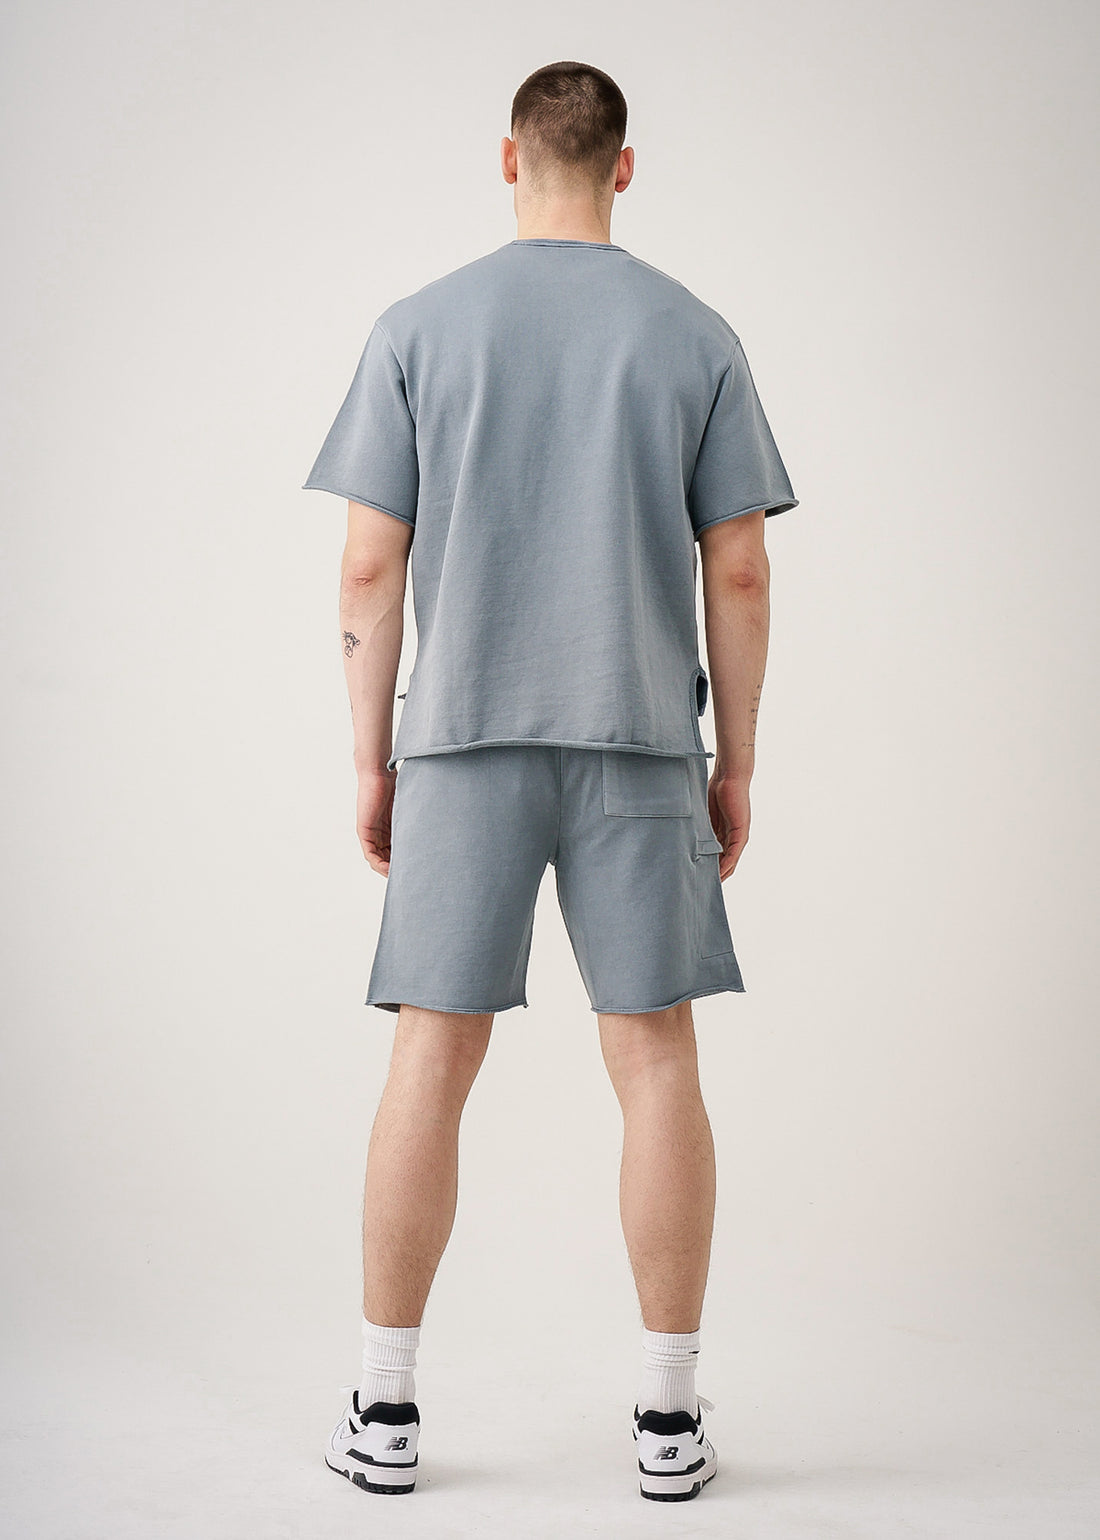 315 GSM French Terry Garment Dye Cropped Short Set